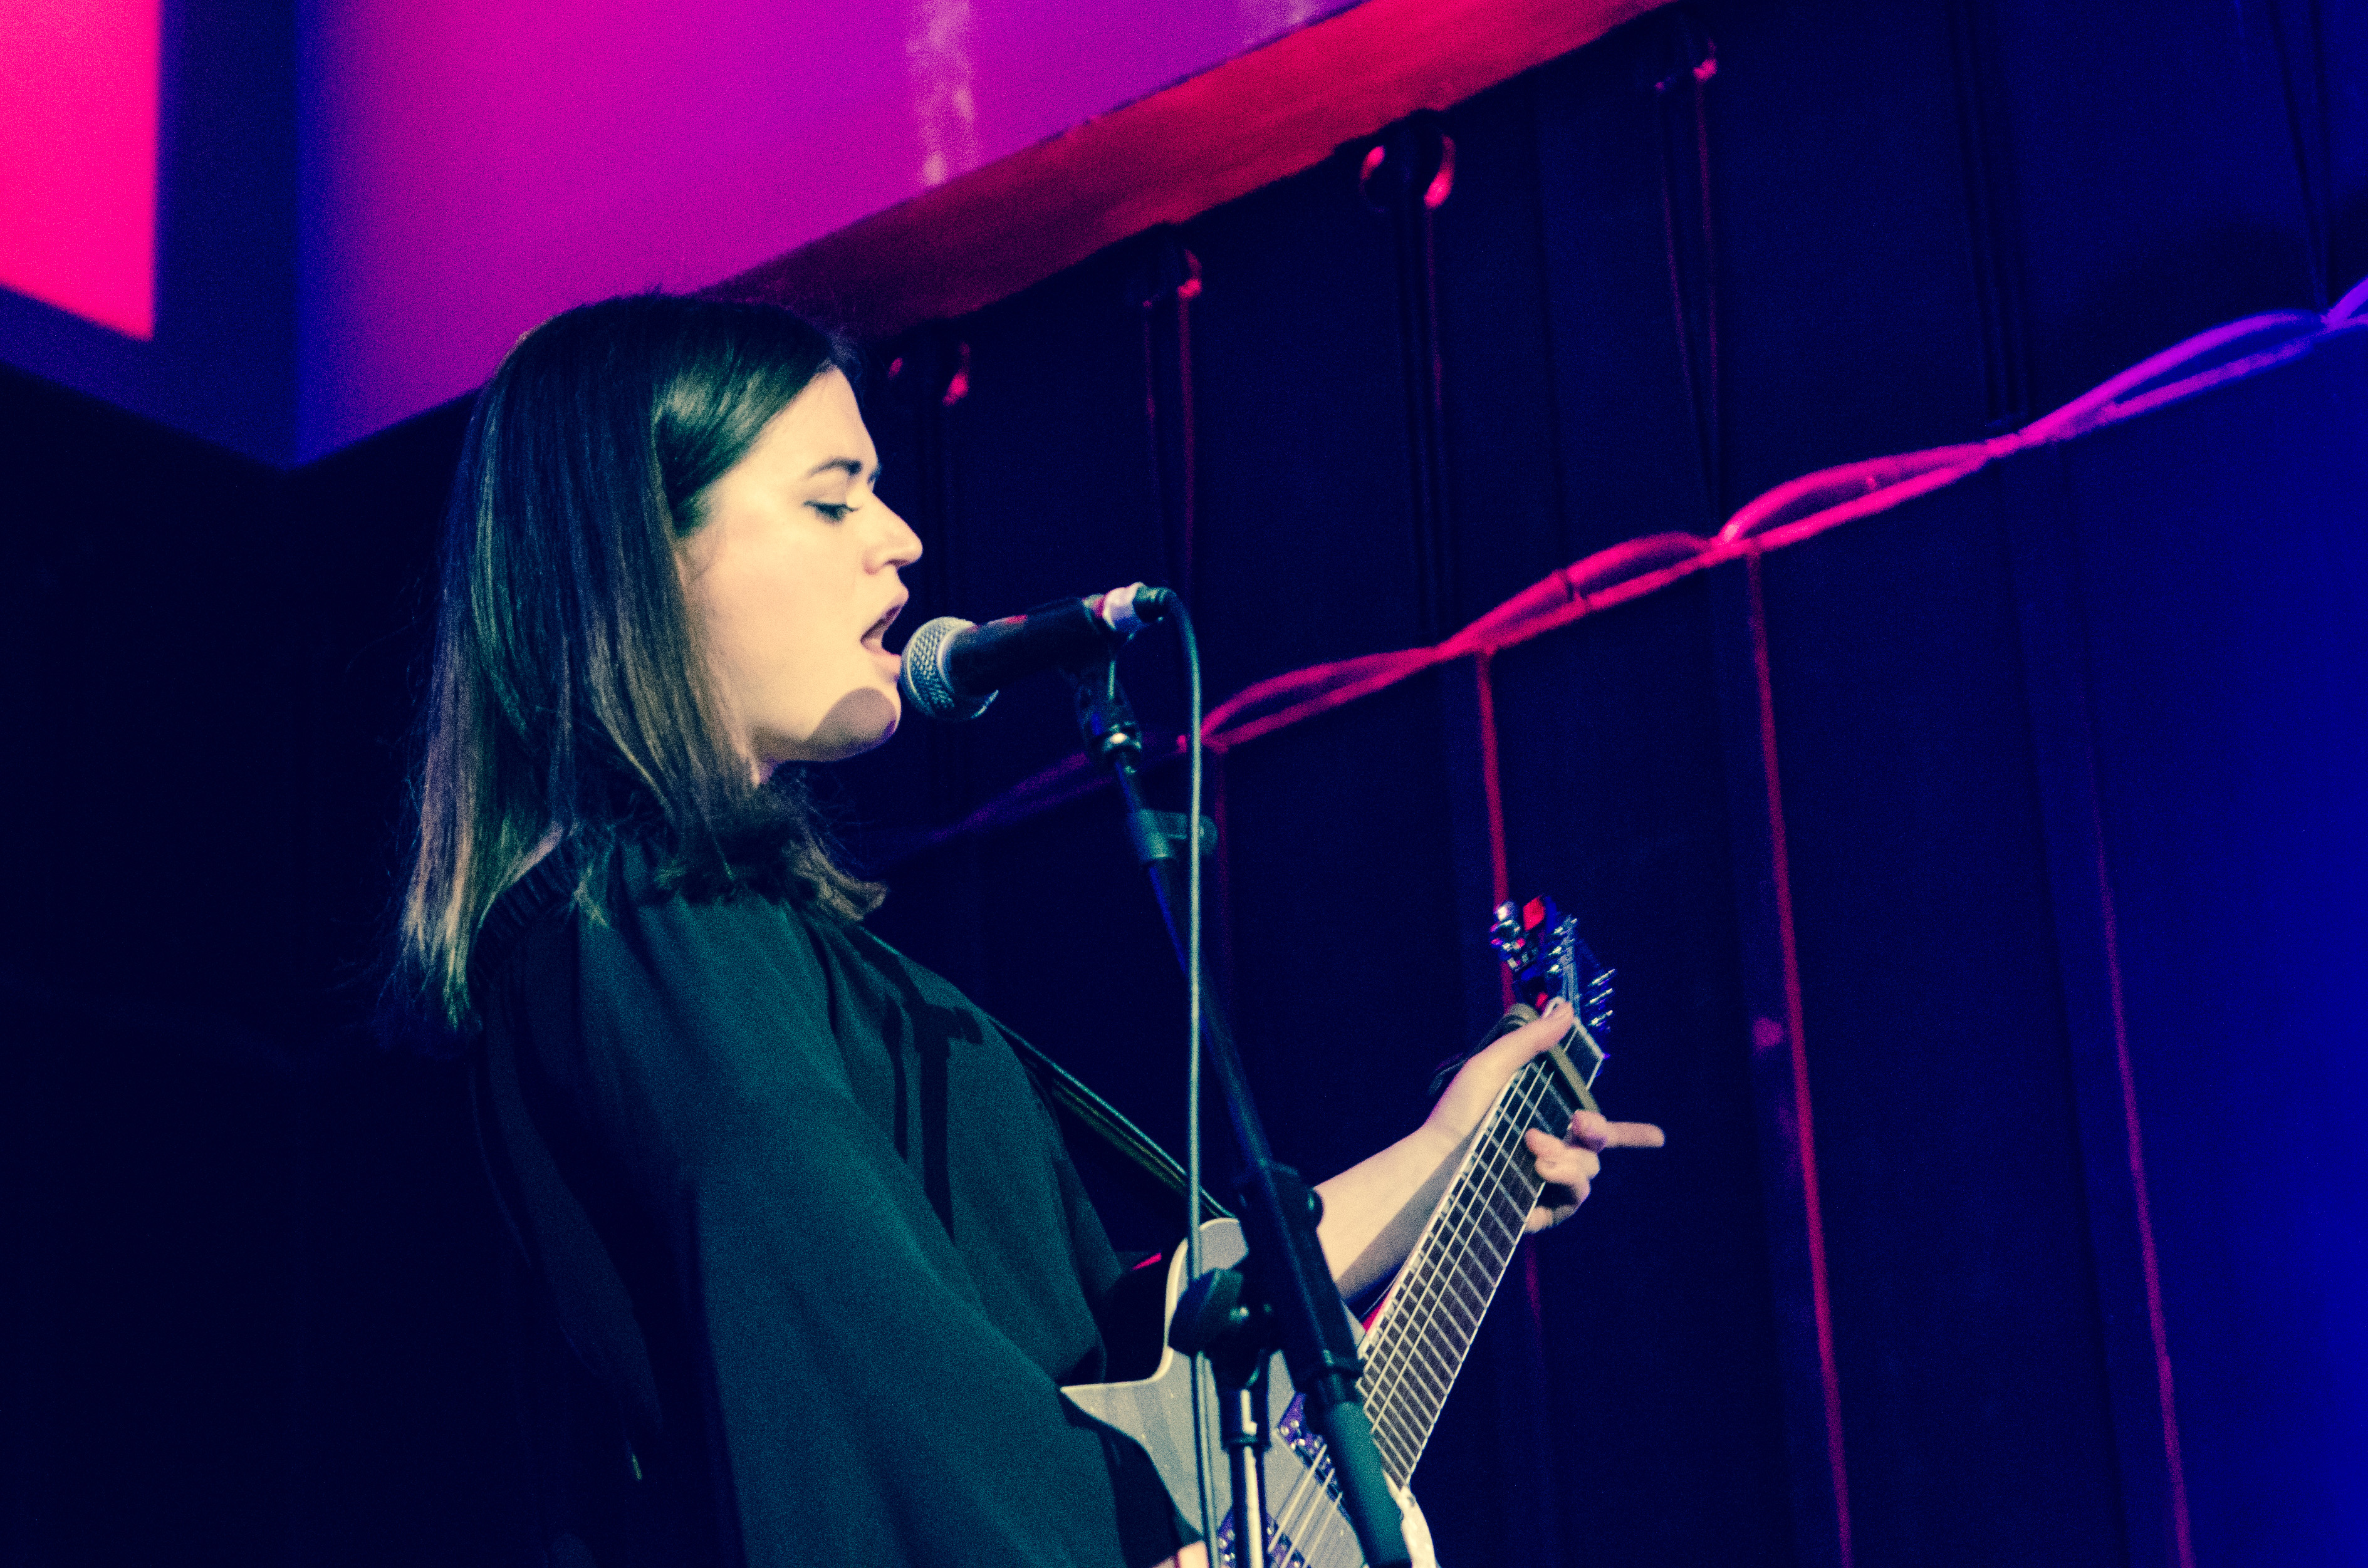 Siobhan Wilson on stage at The Mackintosh Church for Celtic Connections on 3 February 2018